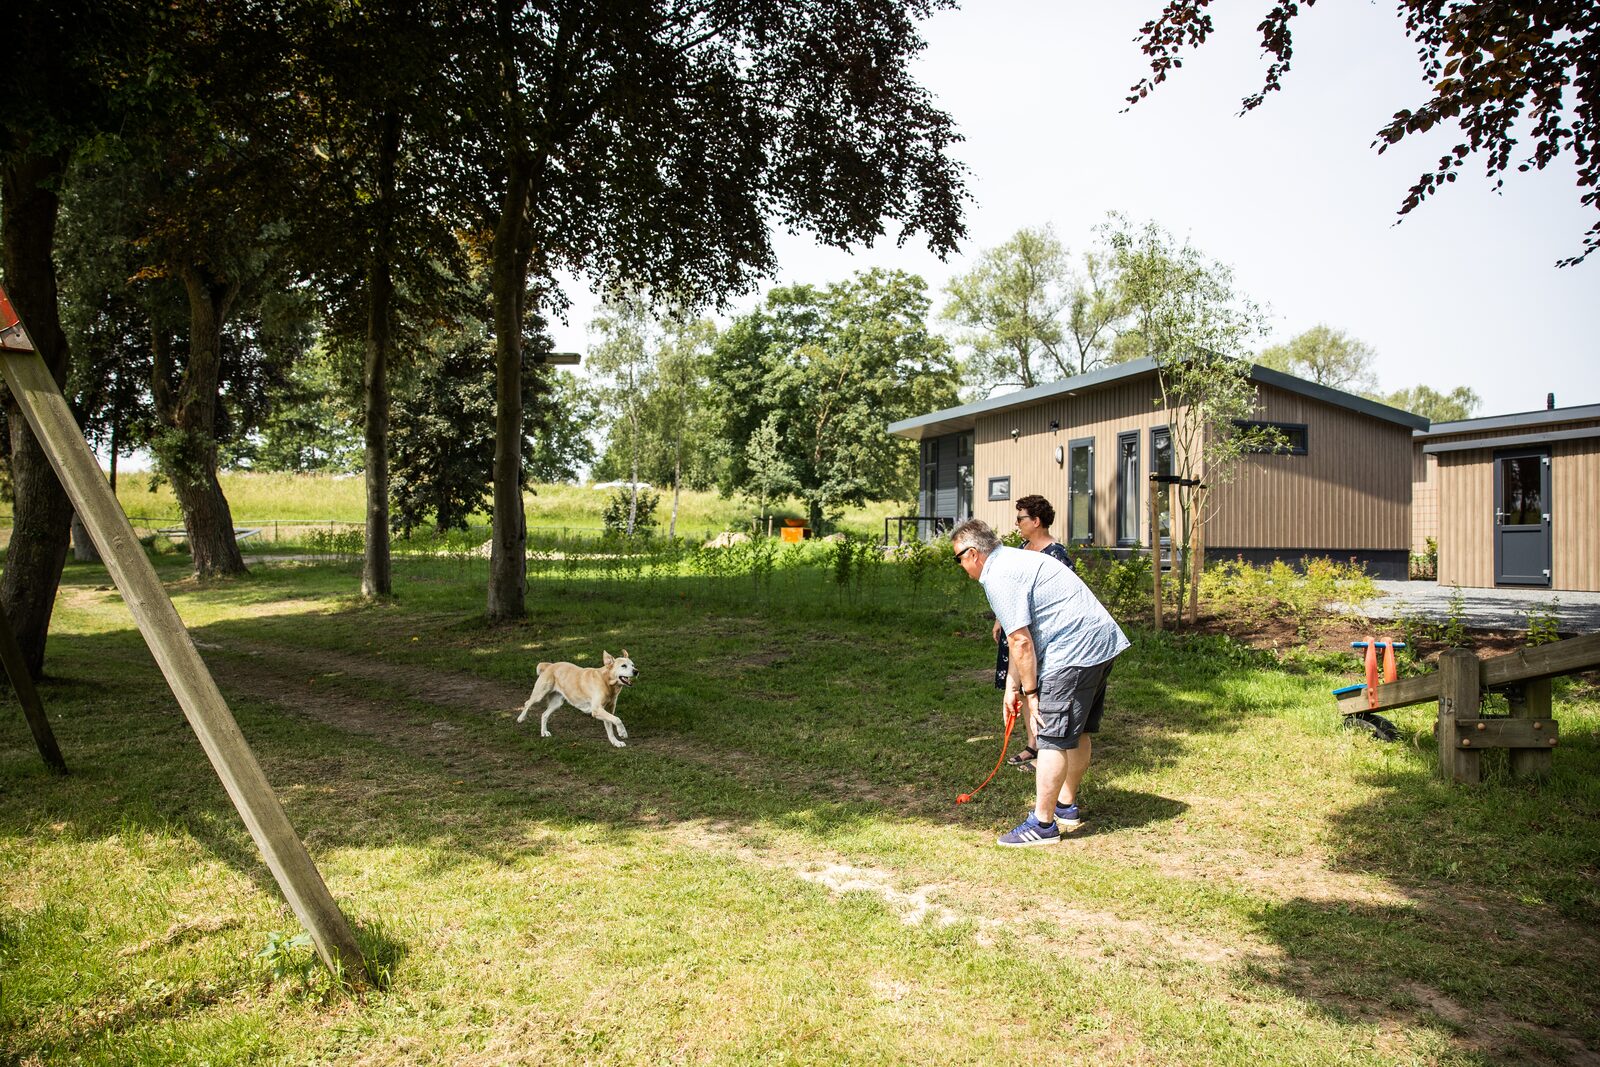 Vacation park The Netherlands with dog